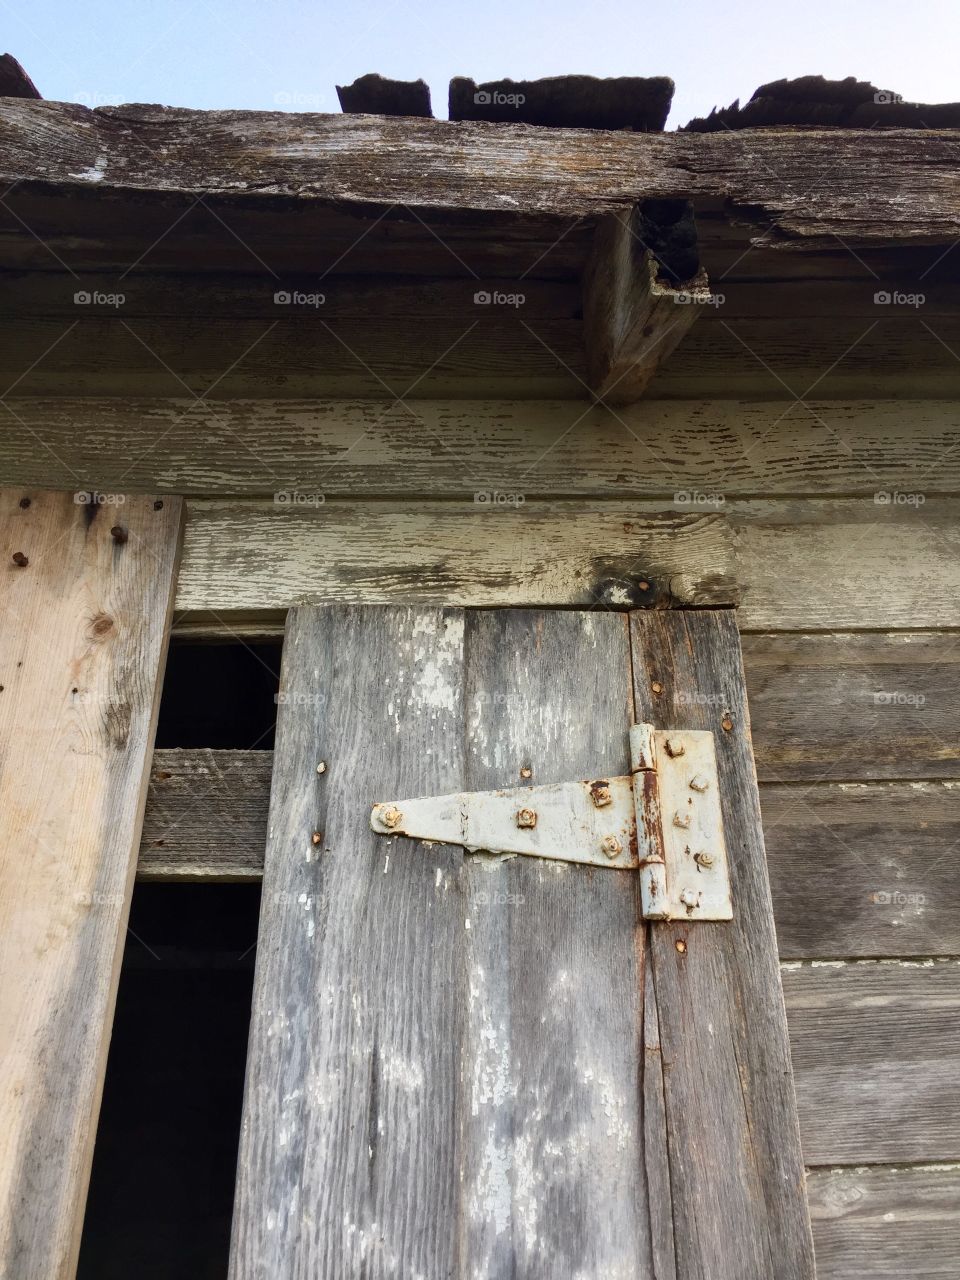 View from below the overhang of an antique weathered,farm shed and door to grain storage with rusted hinges with peeling paint